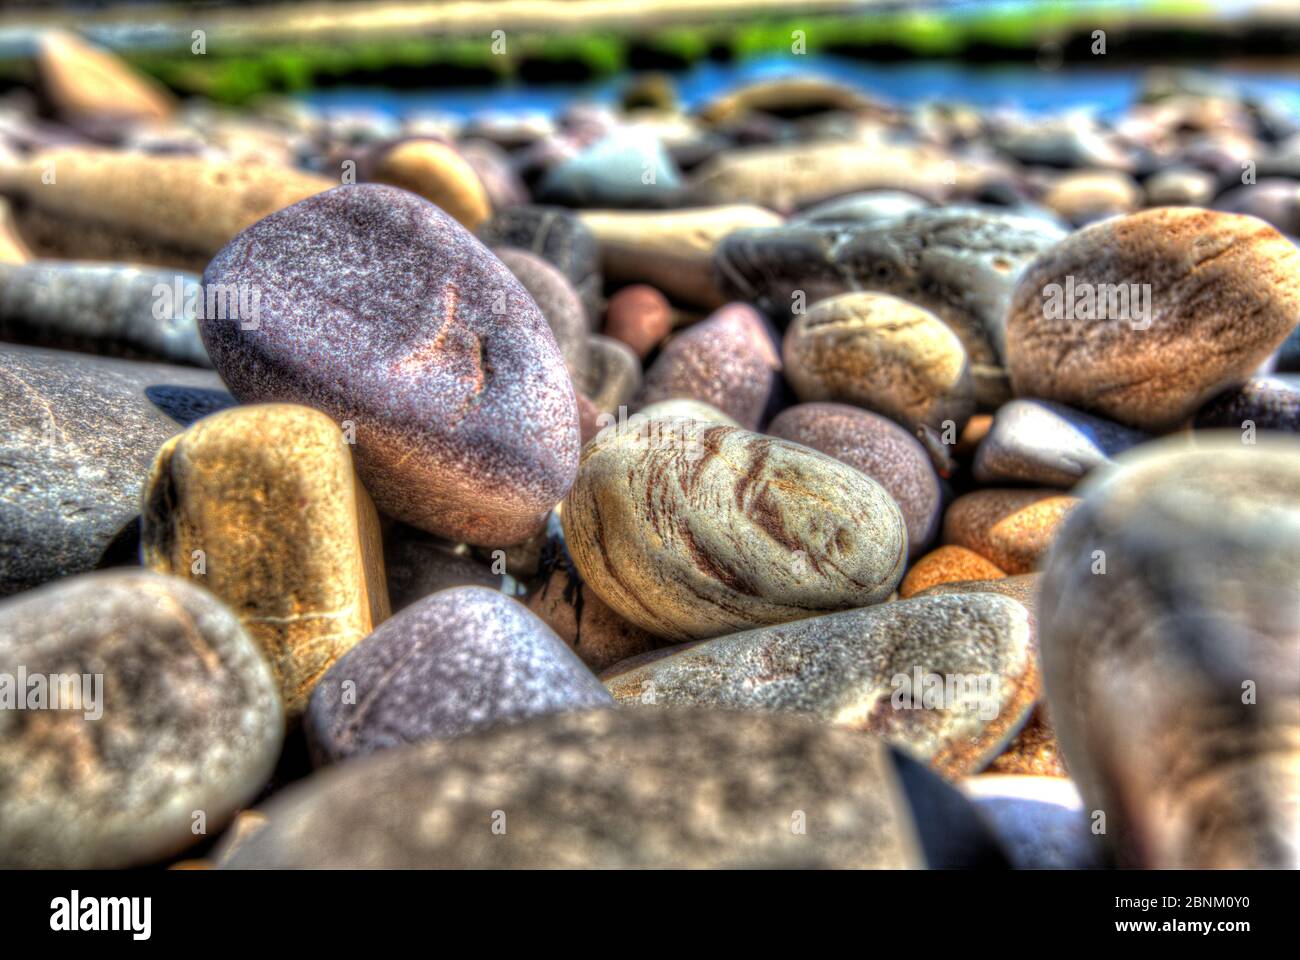 Town of Crail, Scotland. Artistic close up view of the rocky shoreline at Roome Bay, in the Fife town of Crail. Stock Photo